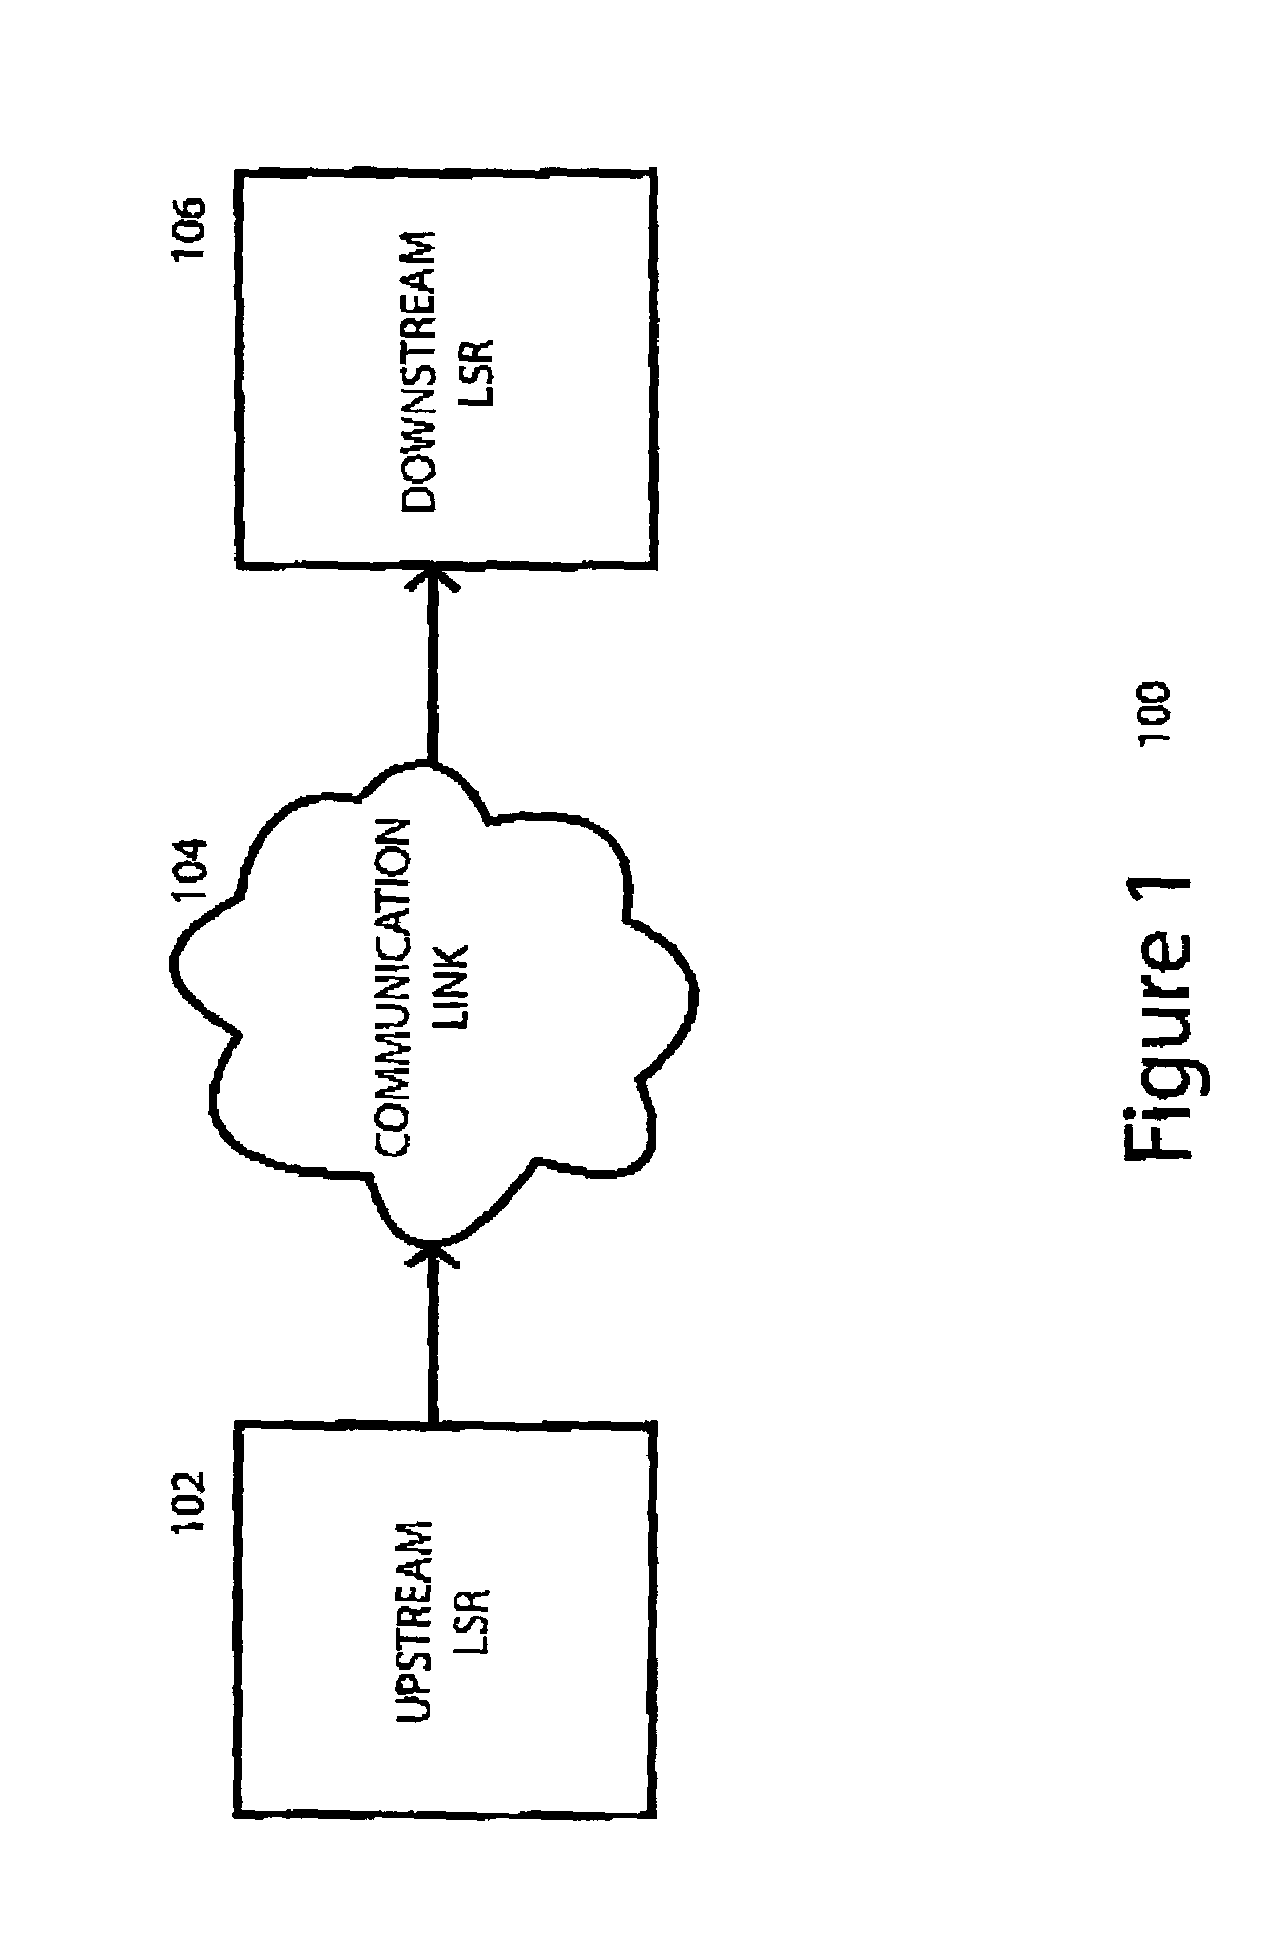 System, device, and method for establishing and removing a label switched path in a communication network